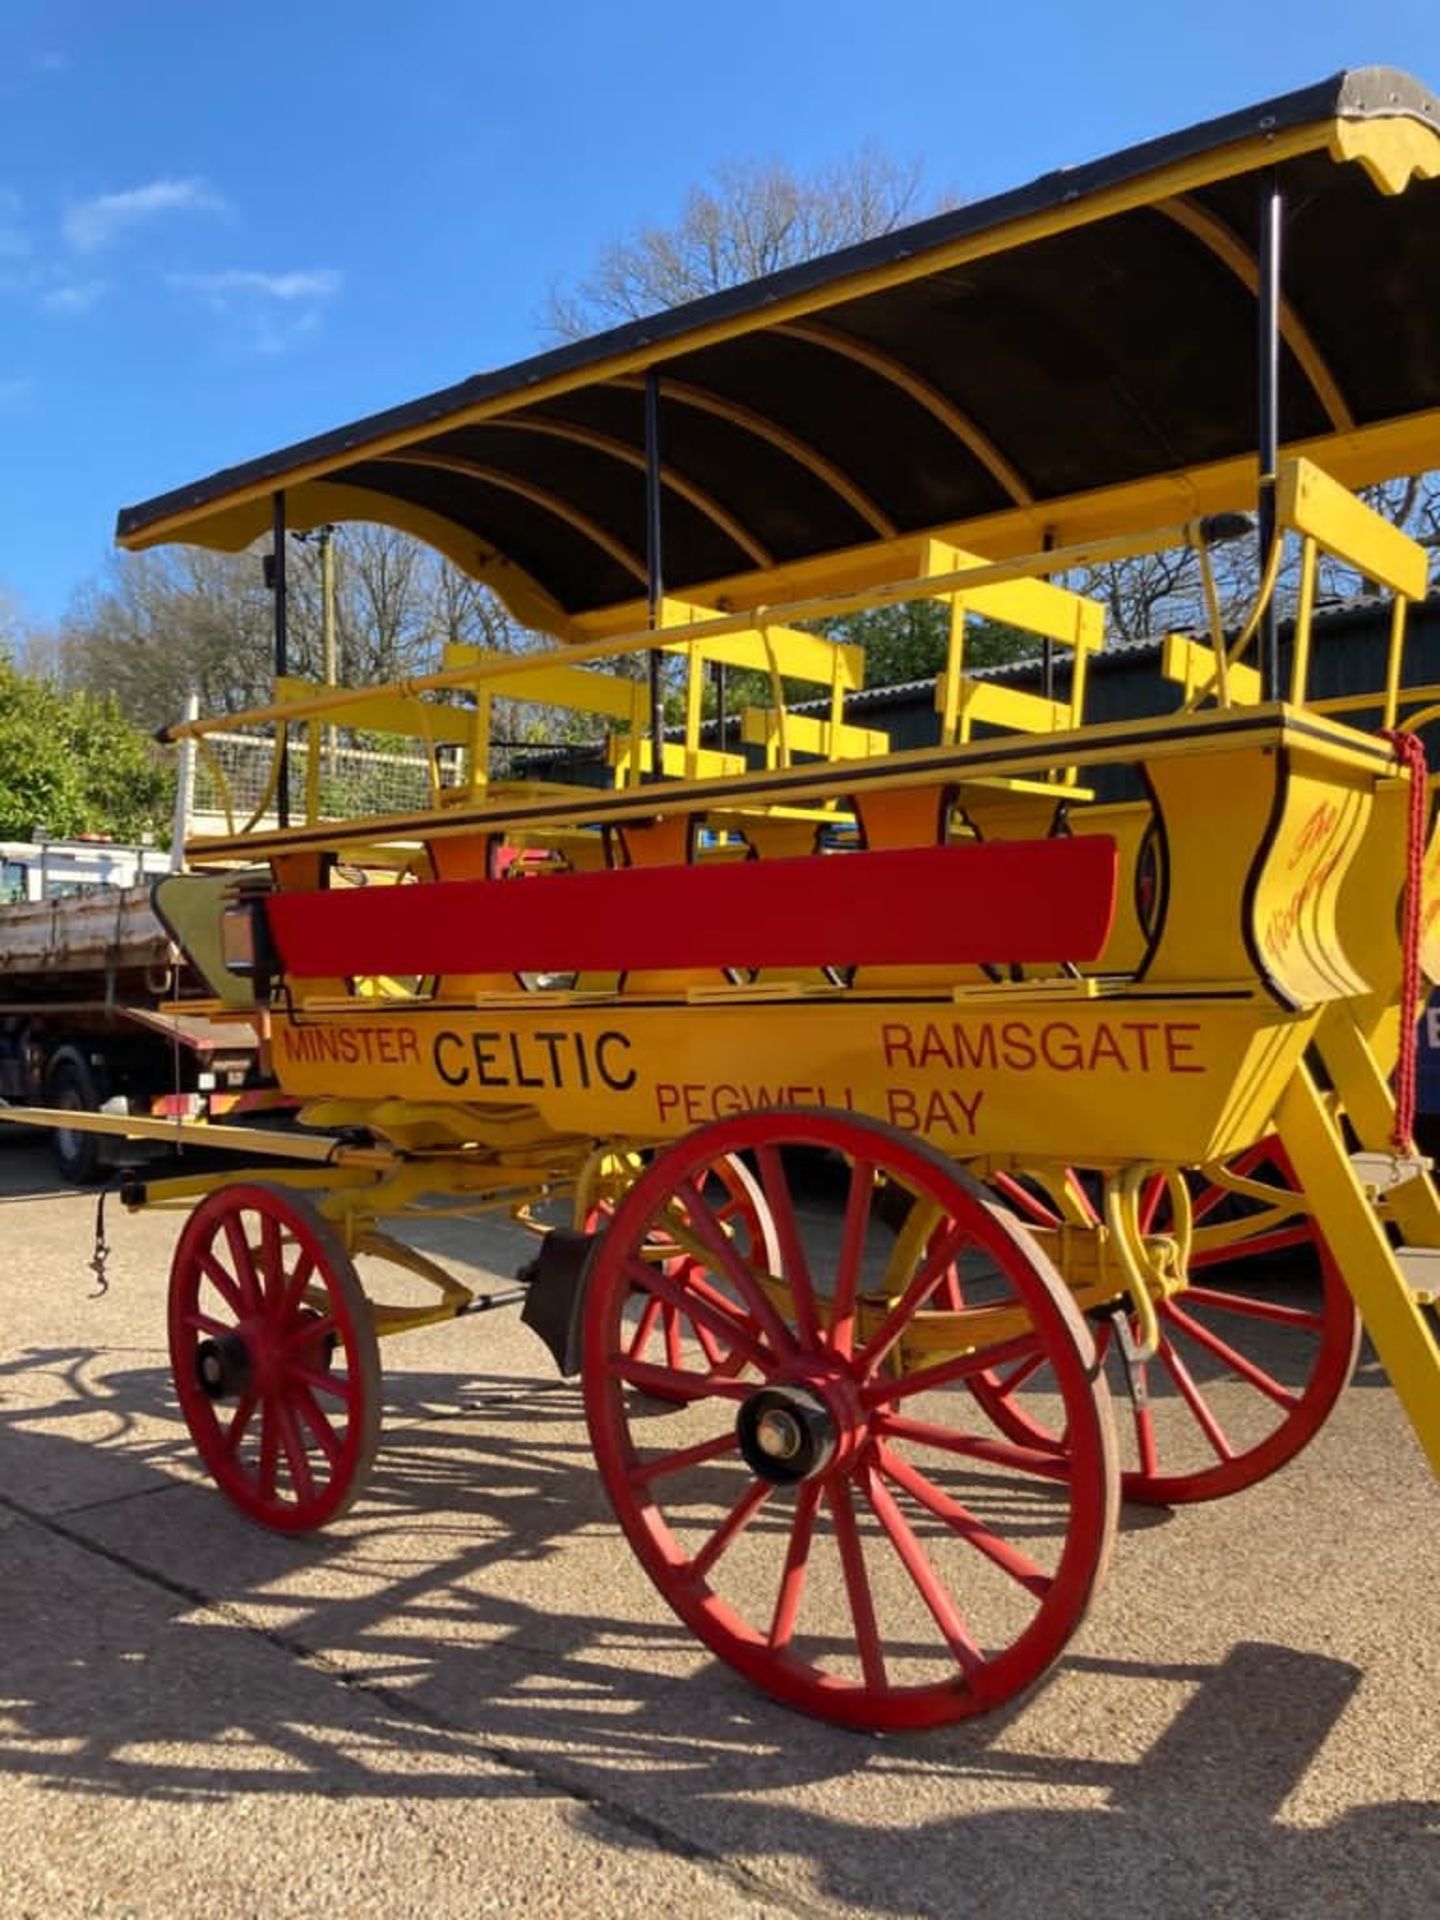 CHARABANC painted yellow and red with 21 wooden seats accessible via a rear staircase